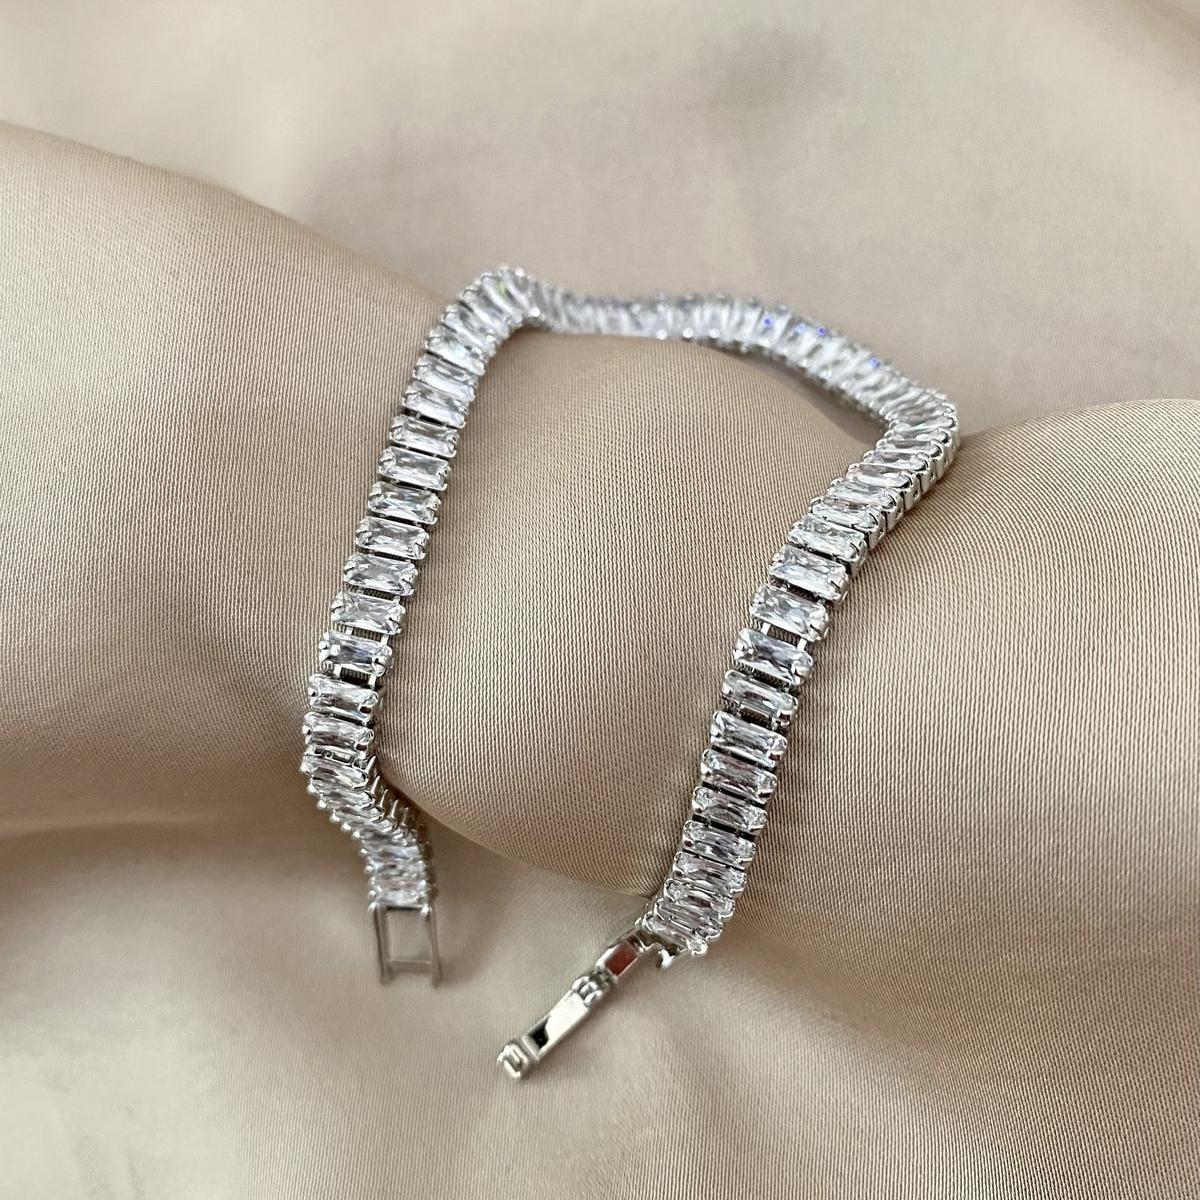 Daiamond Water Bracelet • Bridesmaid Gifts For Wedding Day - Trending Silver Gifts